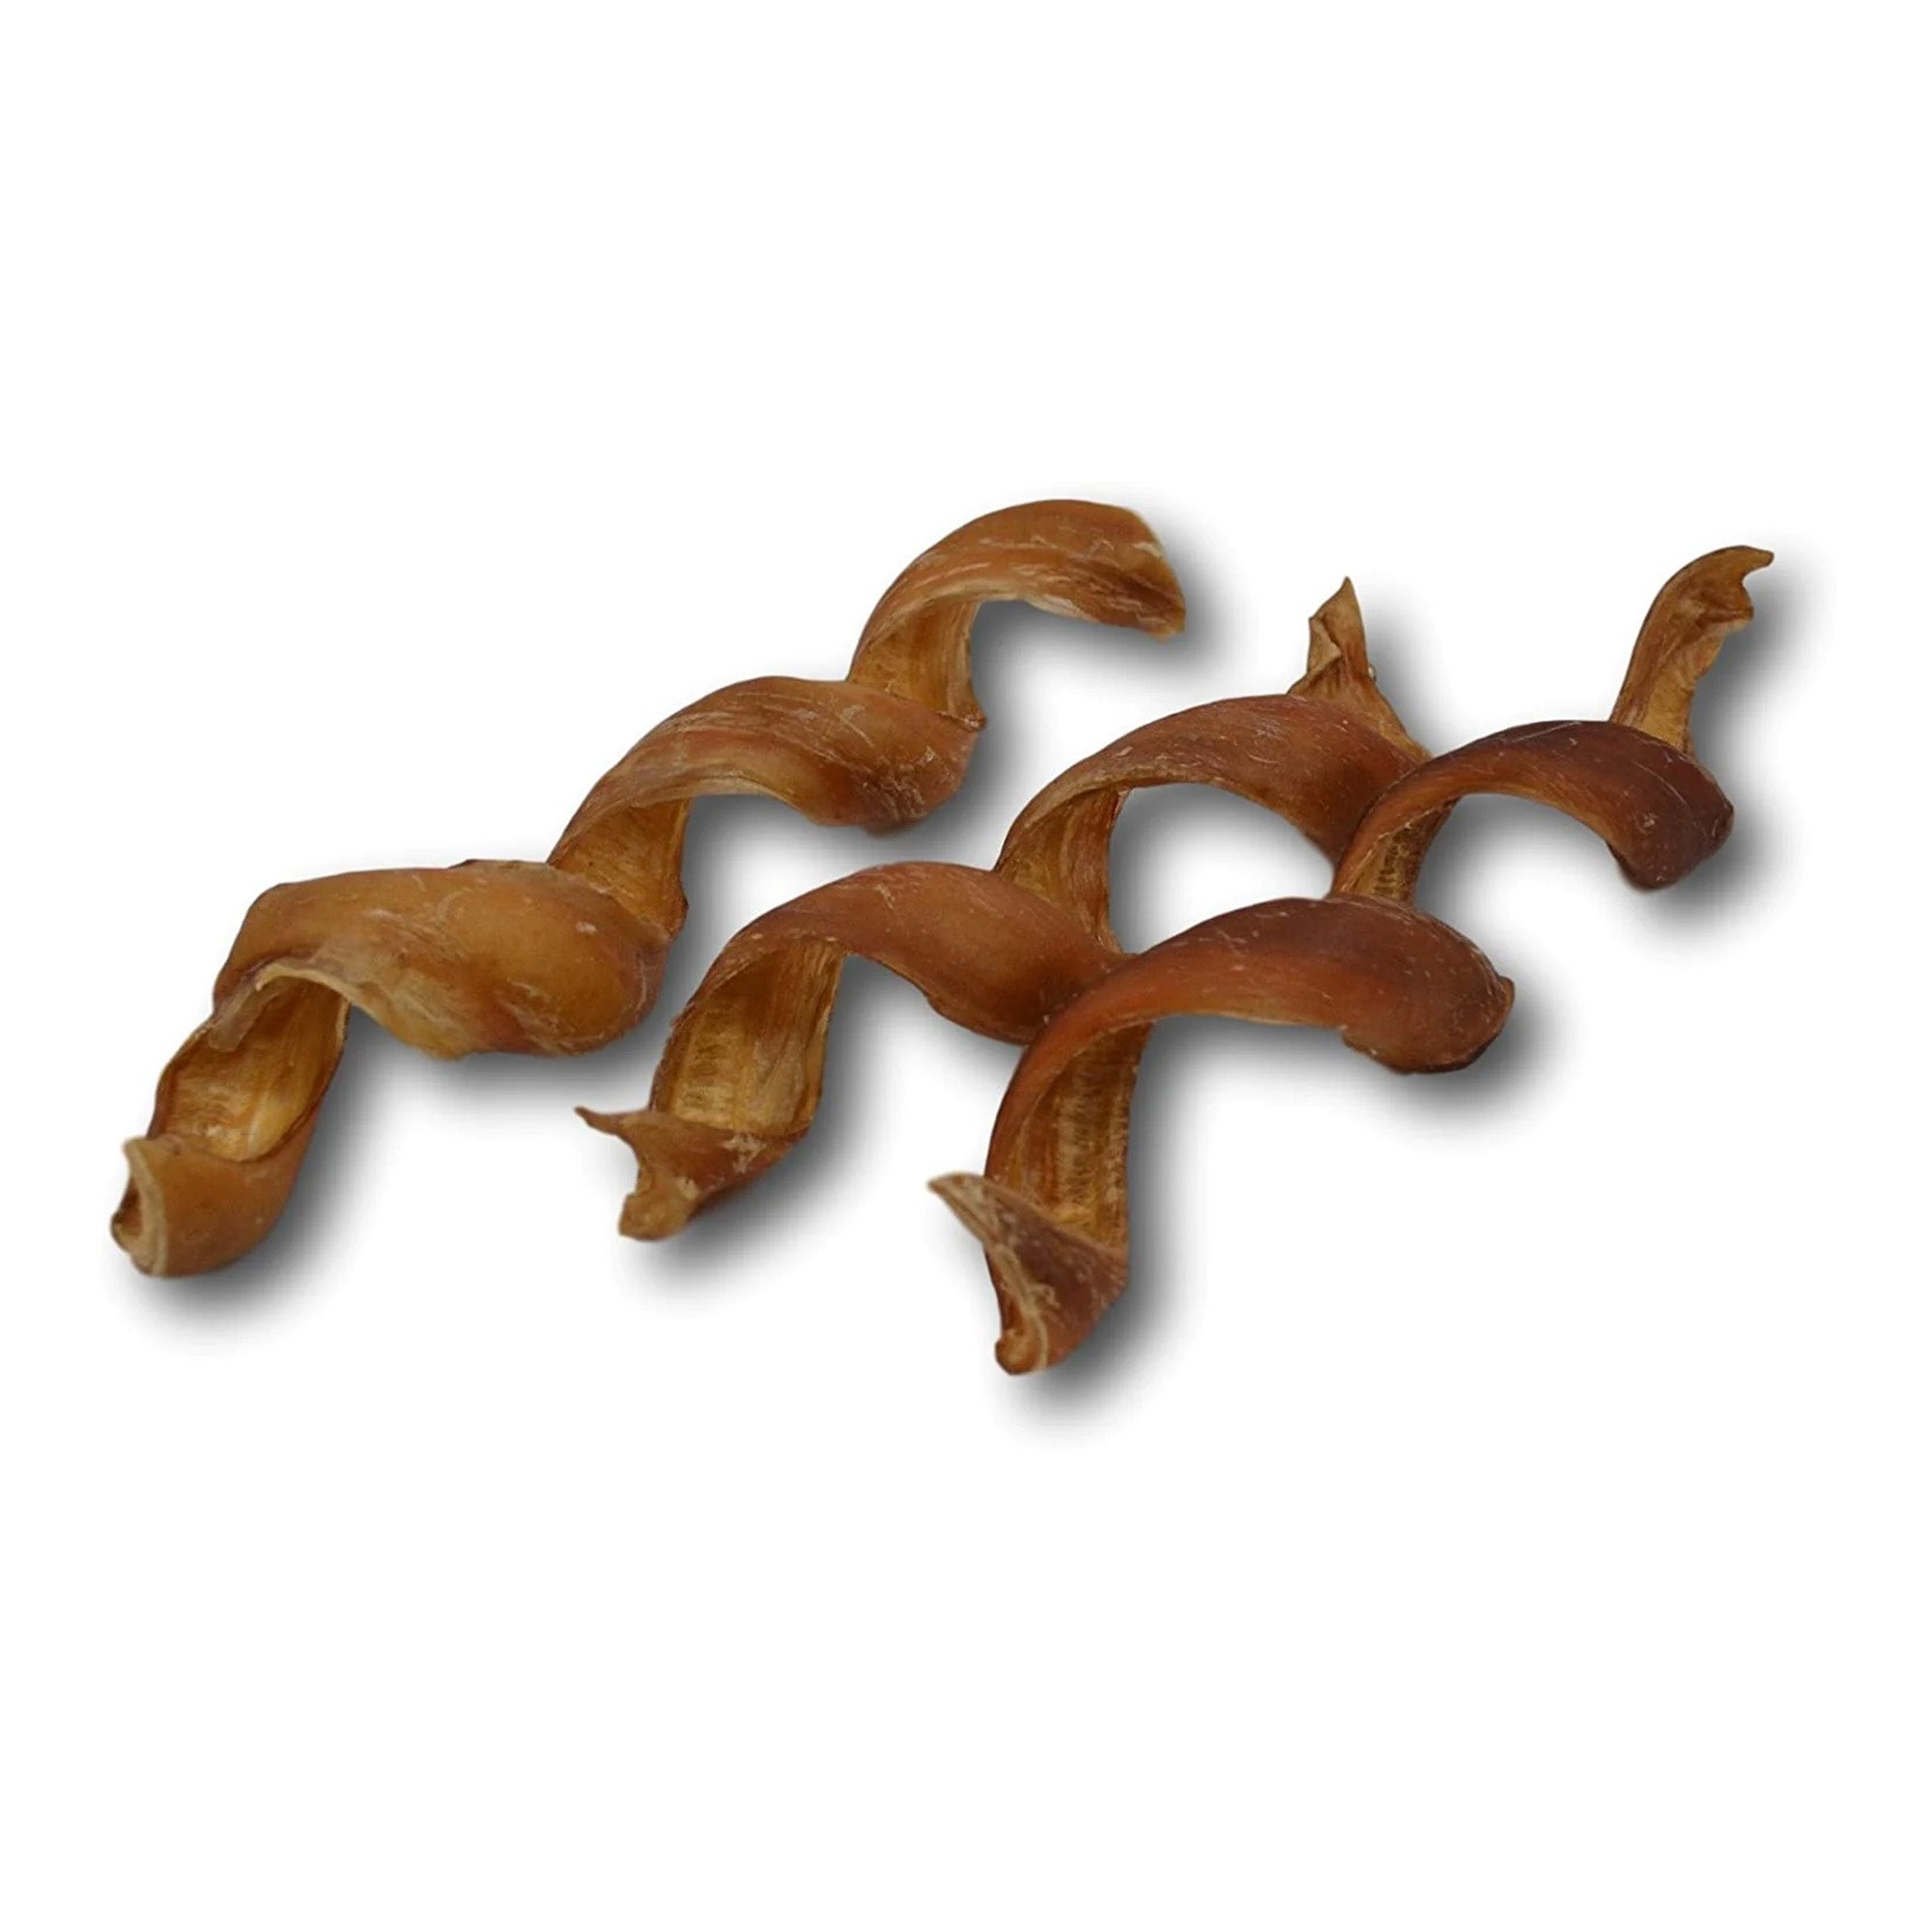 Bully Stick Springs Curly - 6 Pack - K9warehouse.com